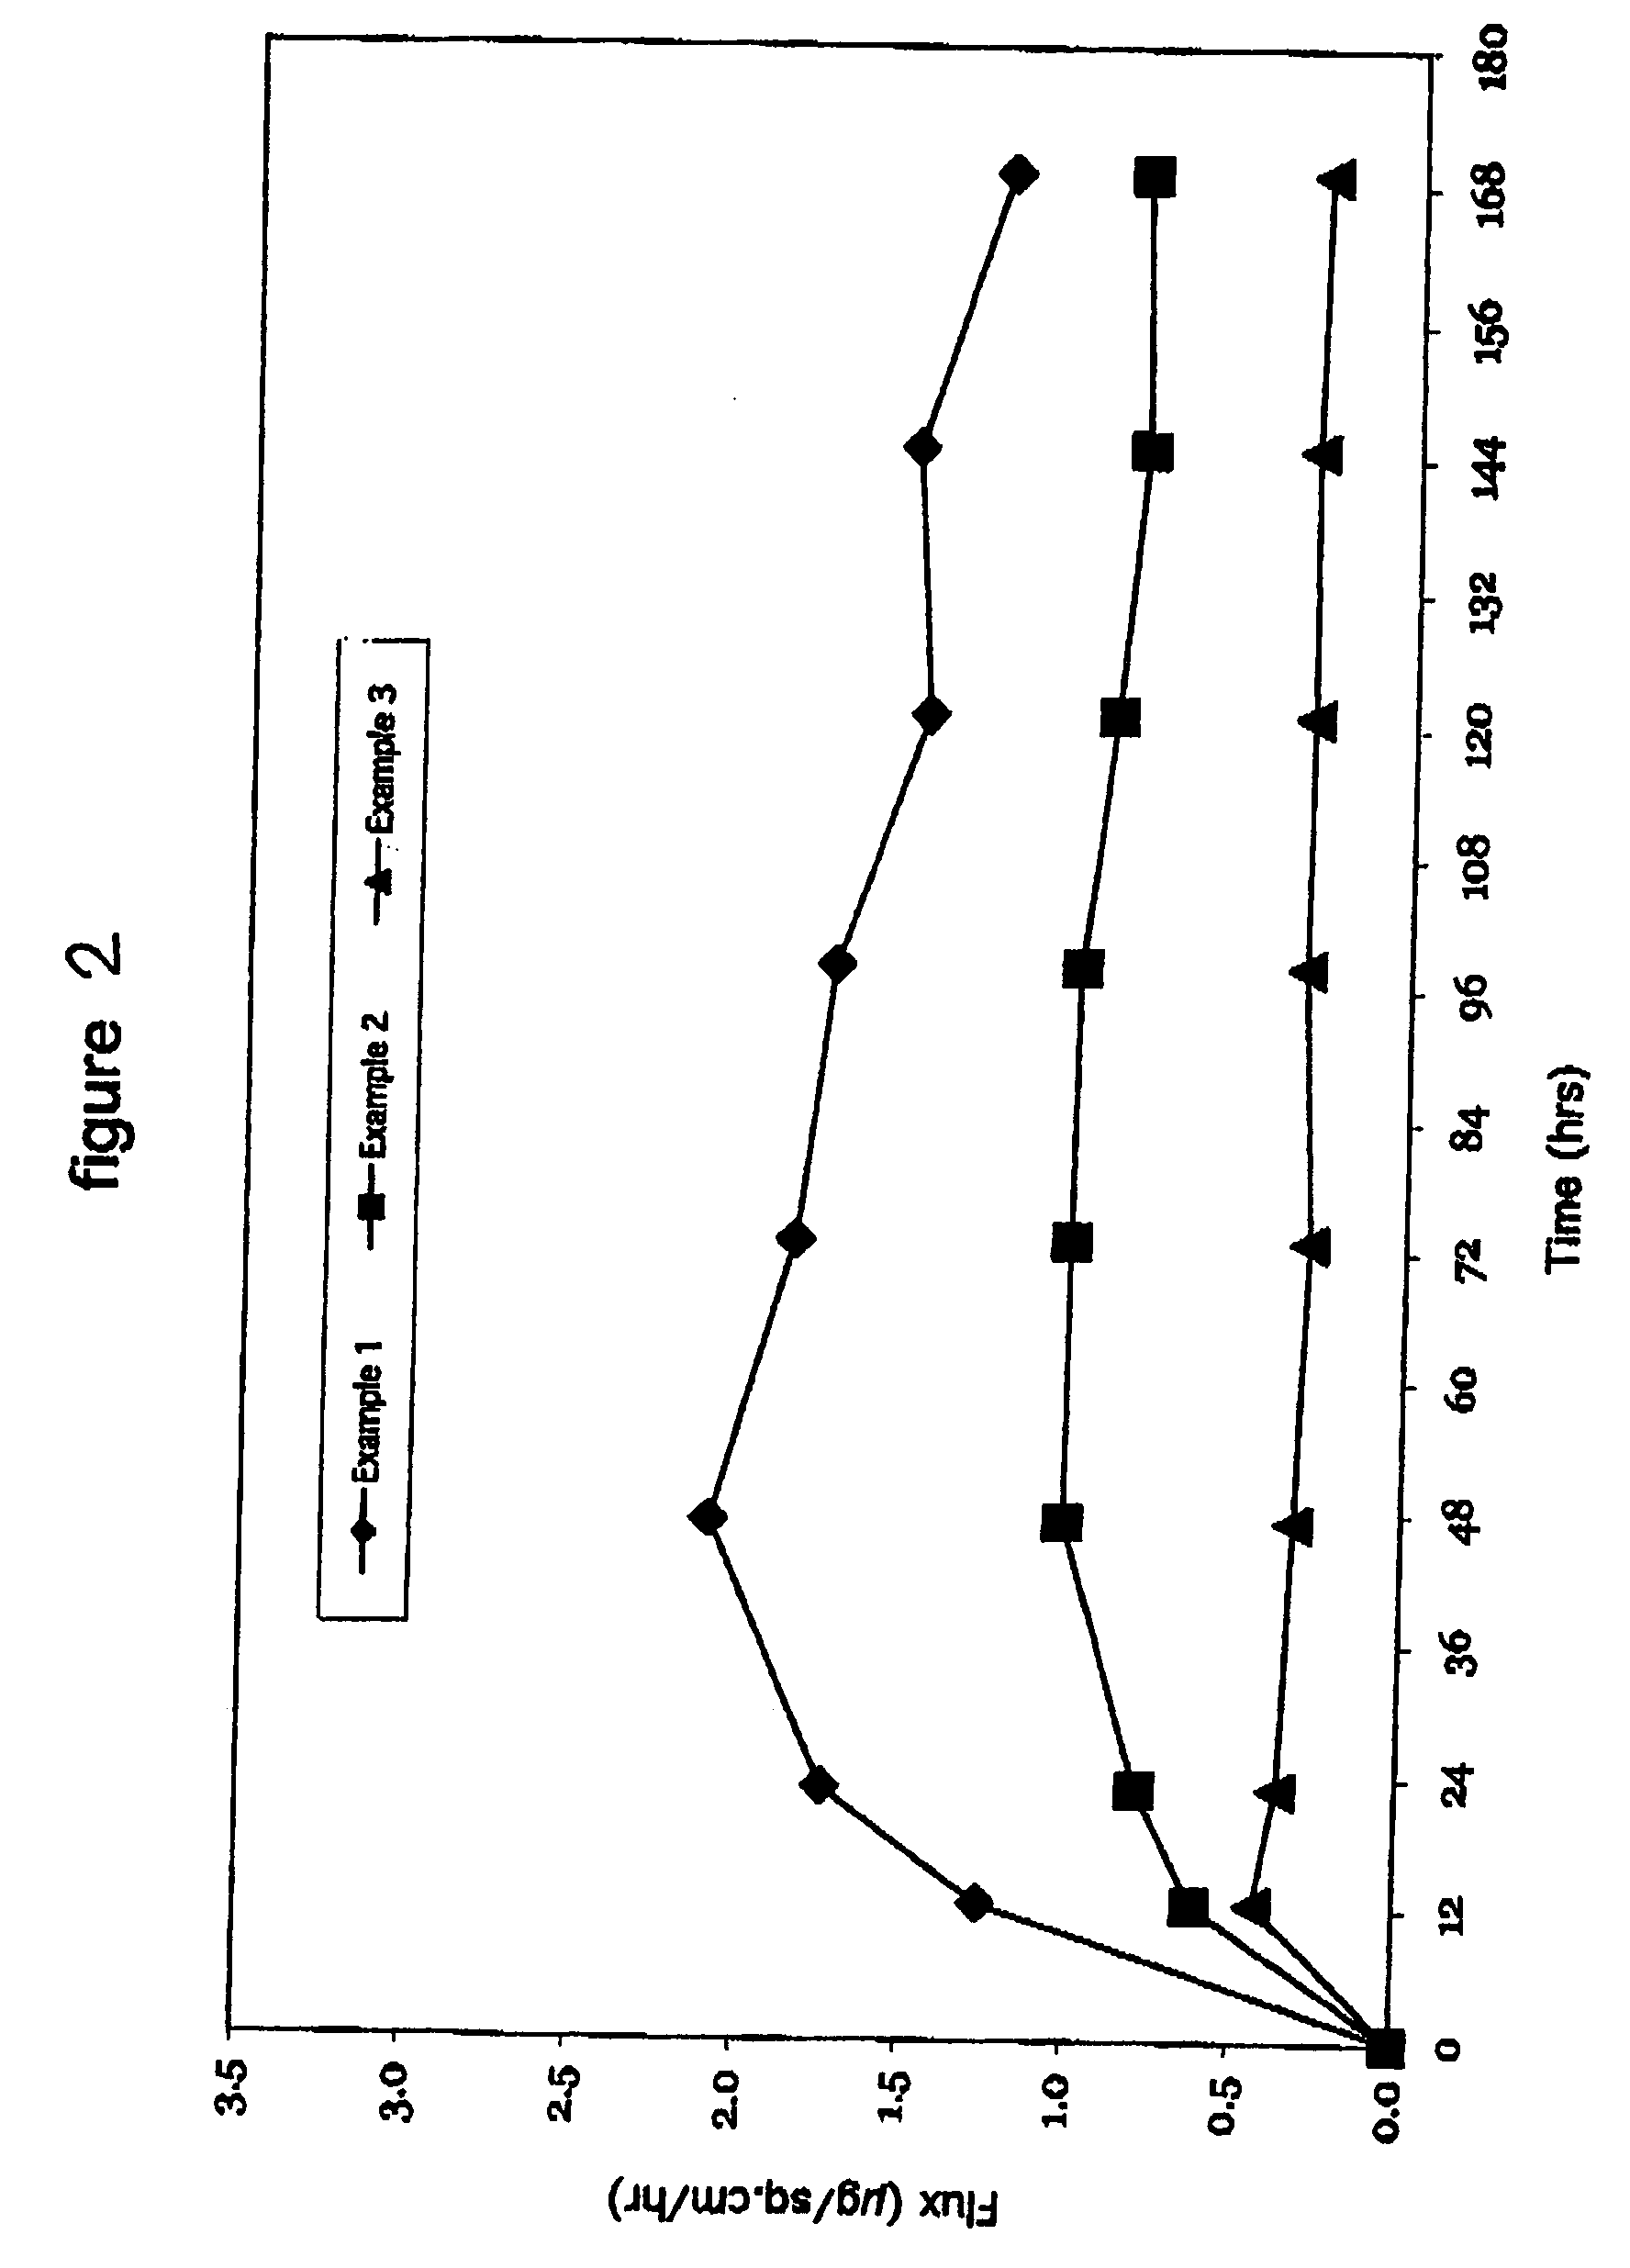 Transdermal drug delivery device including an occlusive backing